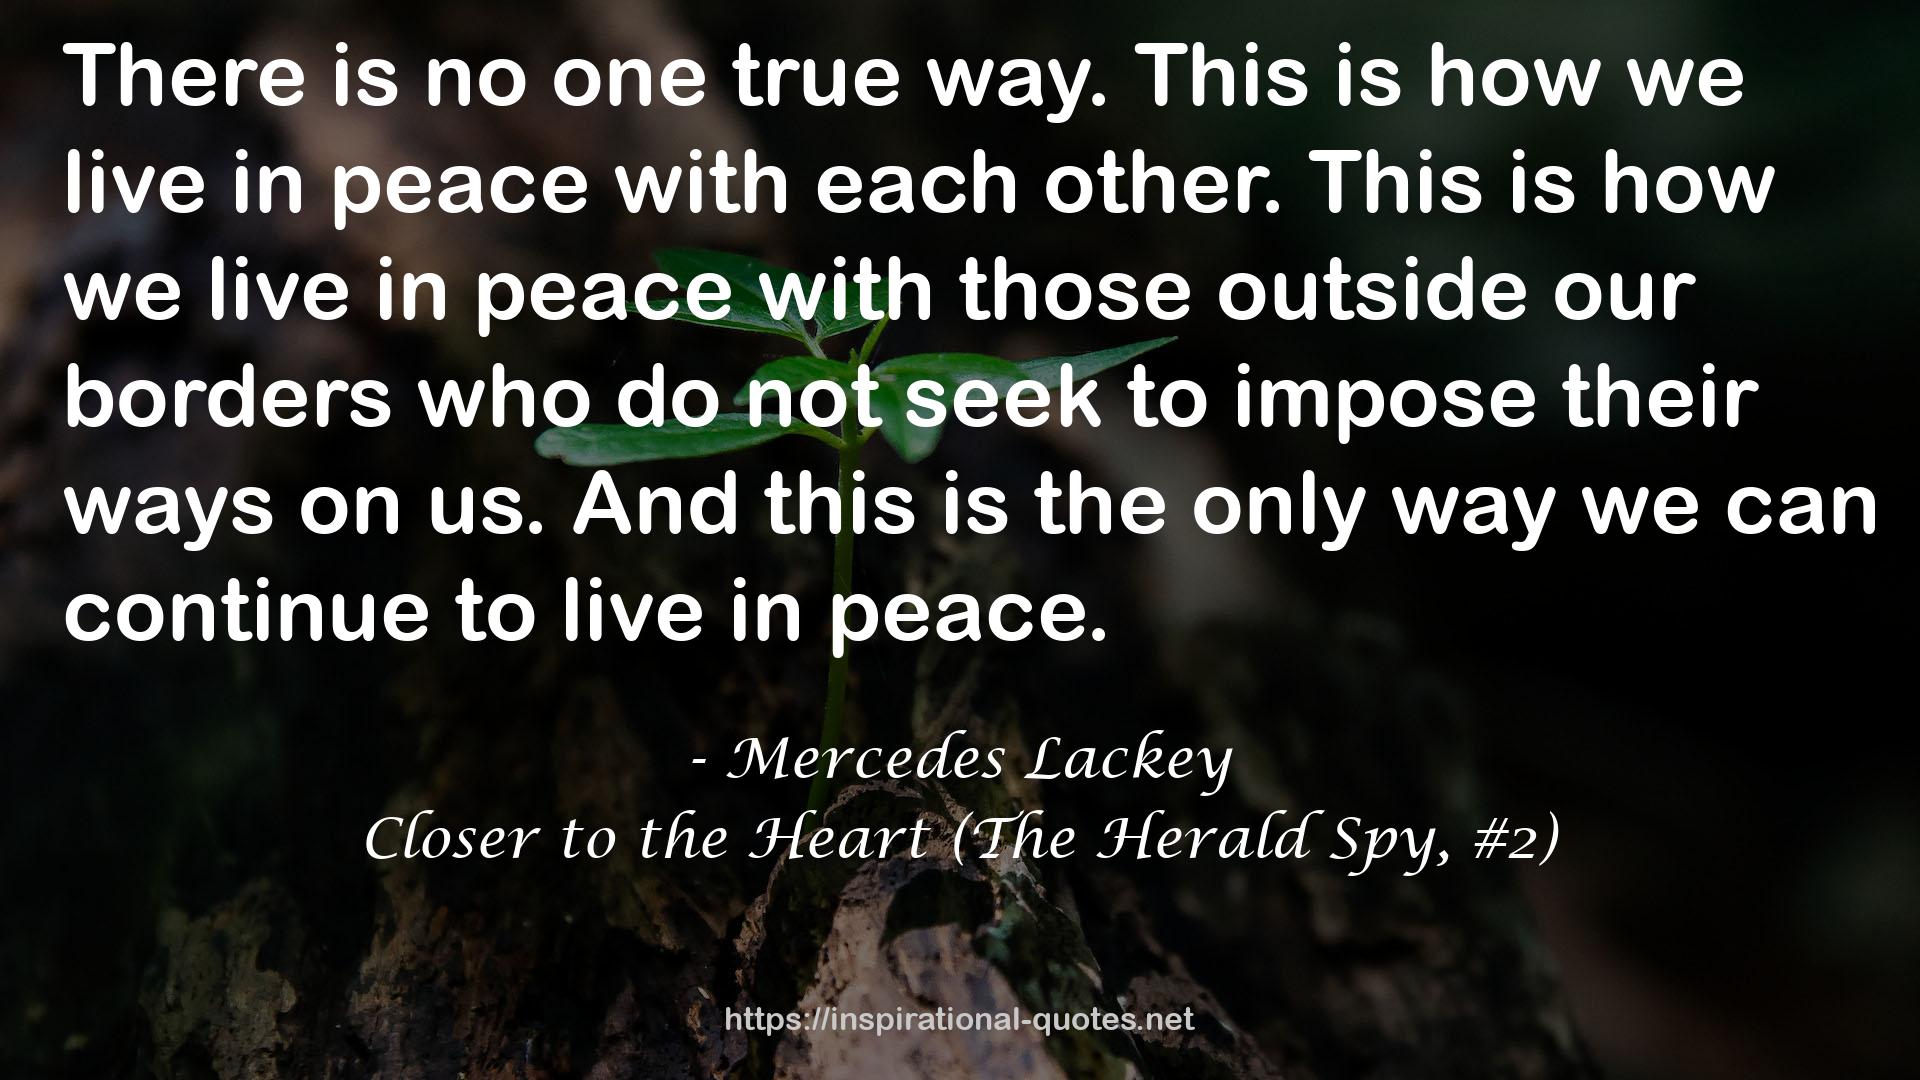 Closer to the Heart (The Herald Spy, #2) QUOTES